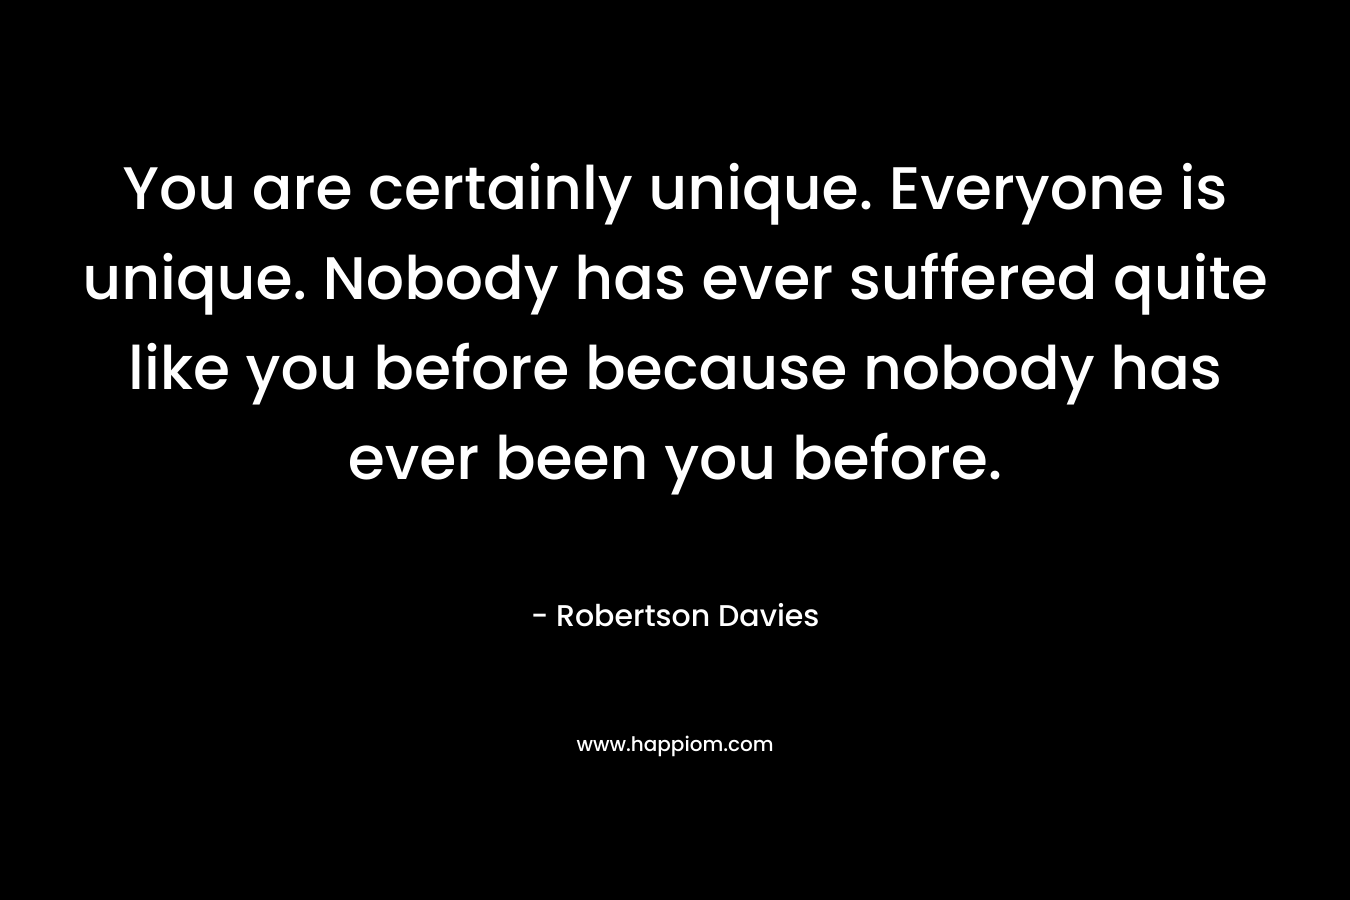 You are certainly unique. Everyone is unique. Nobody has ever suffered quite like you before because nobody has ever been you before.